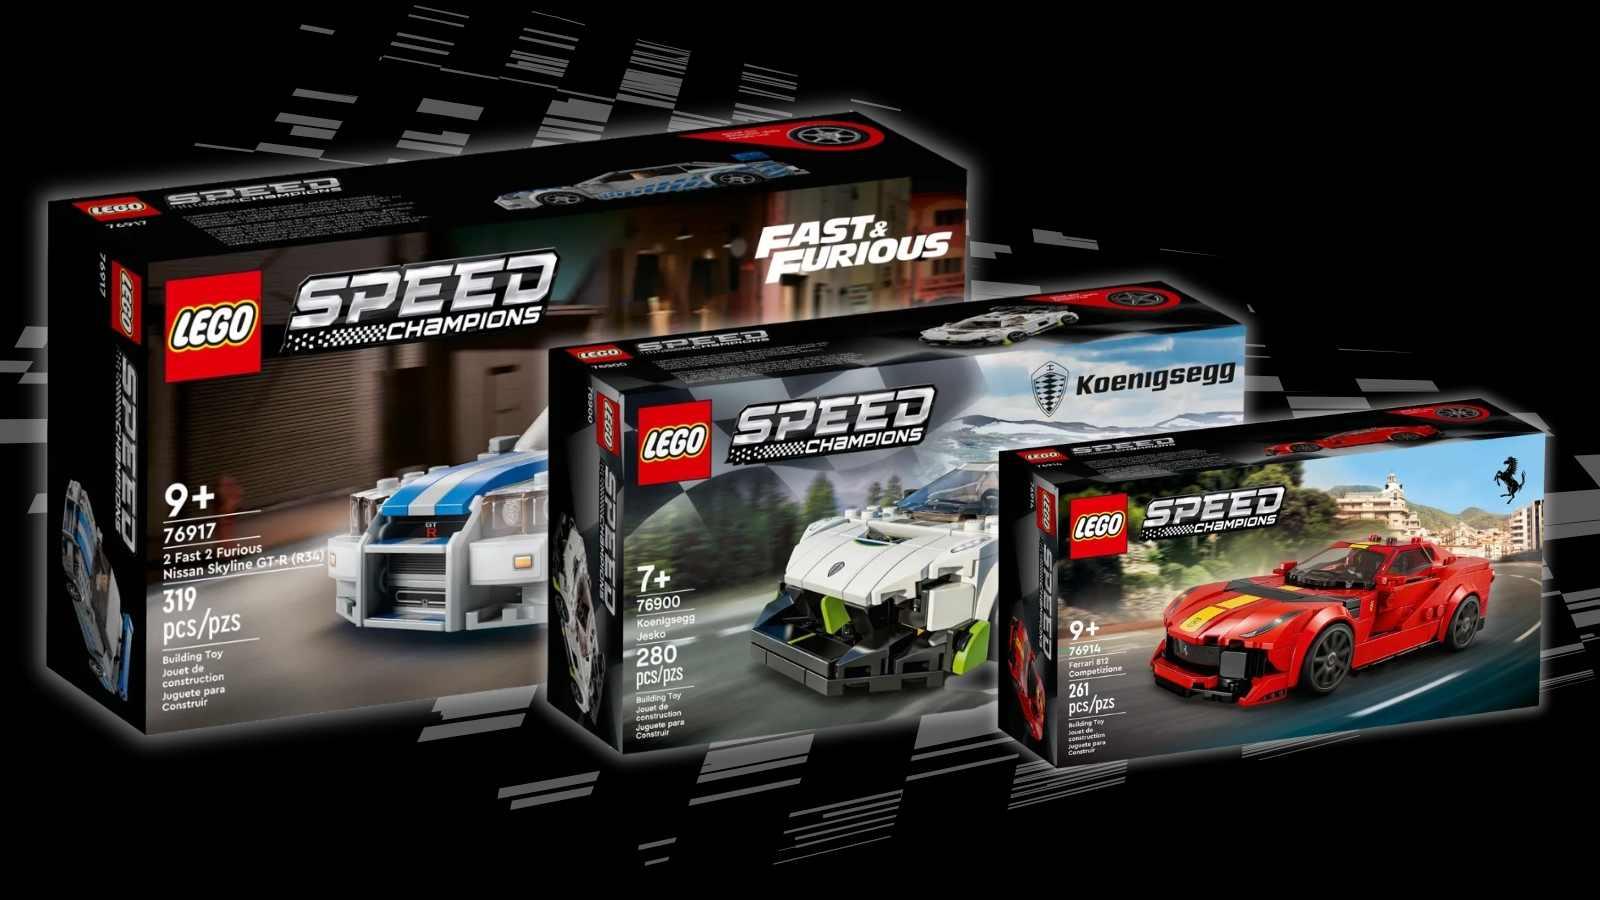 Three of the LEGO Speed Champions sets discounted at Walmart.